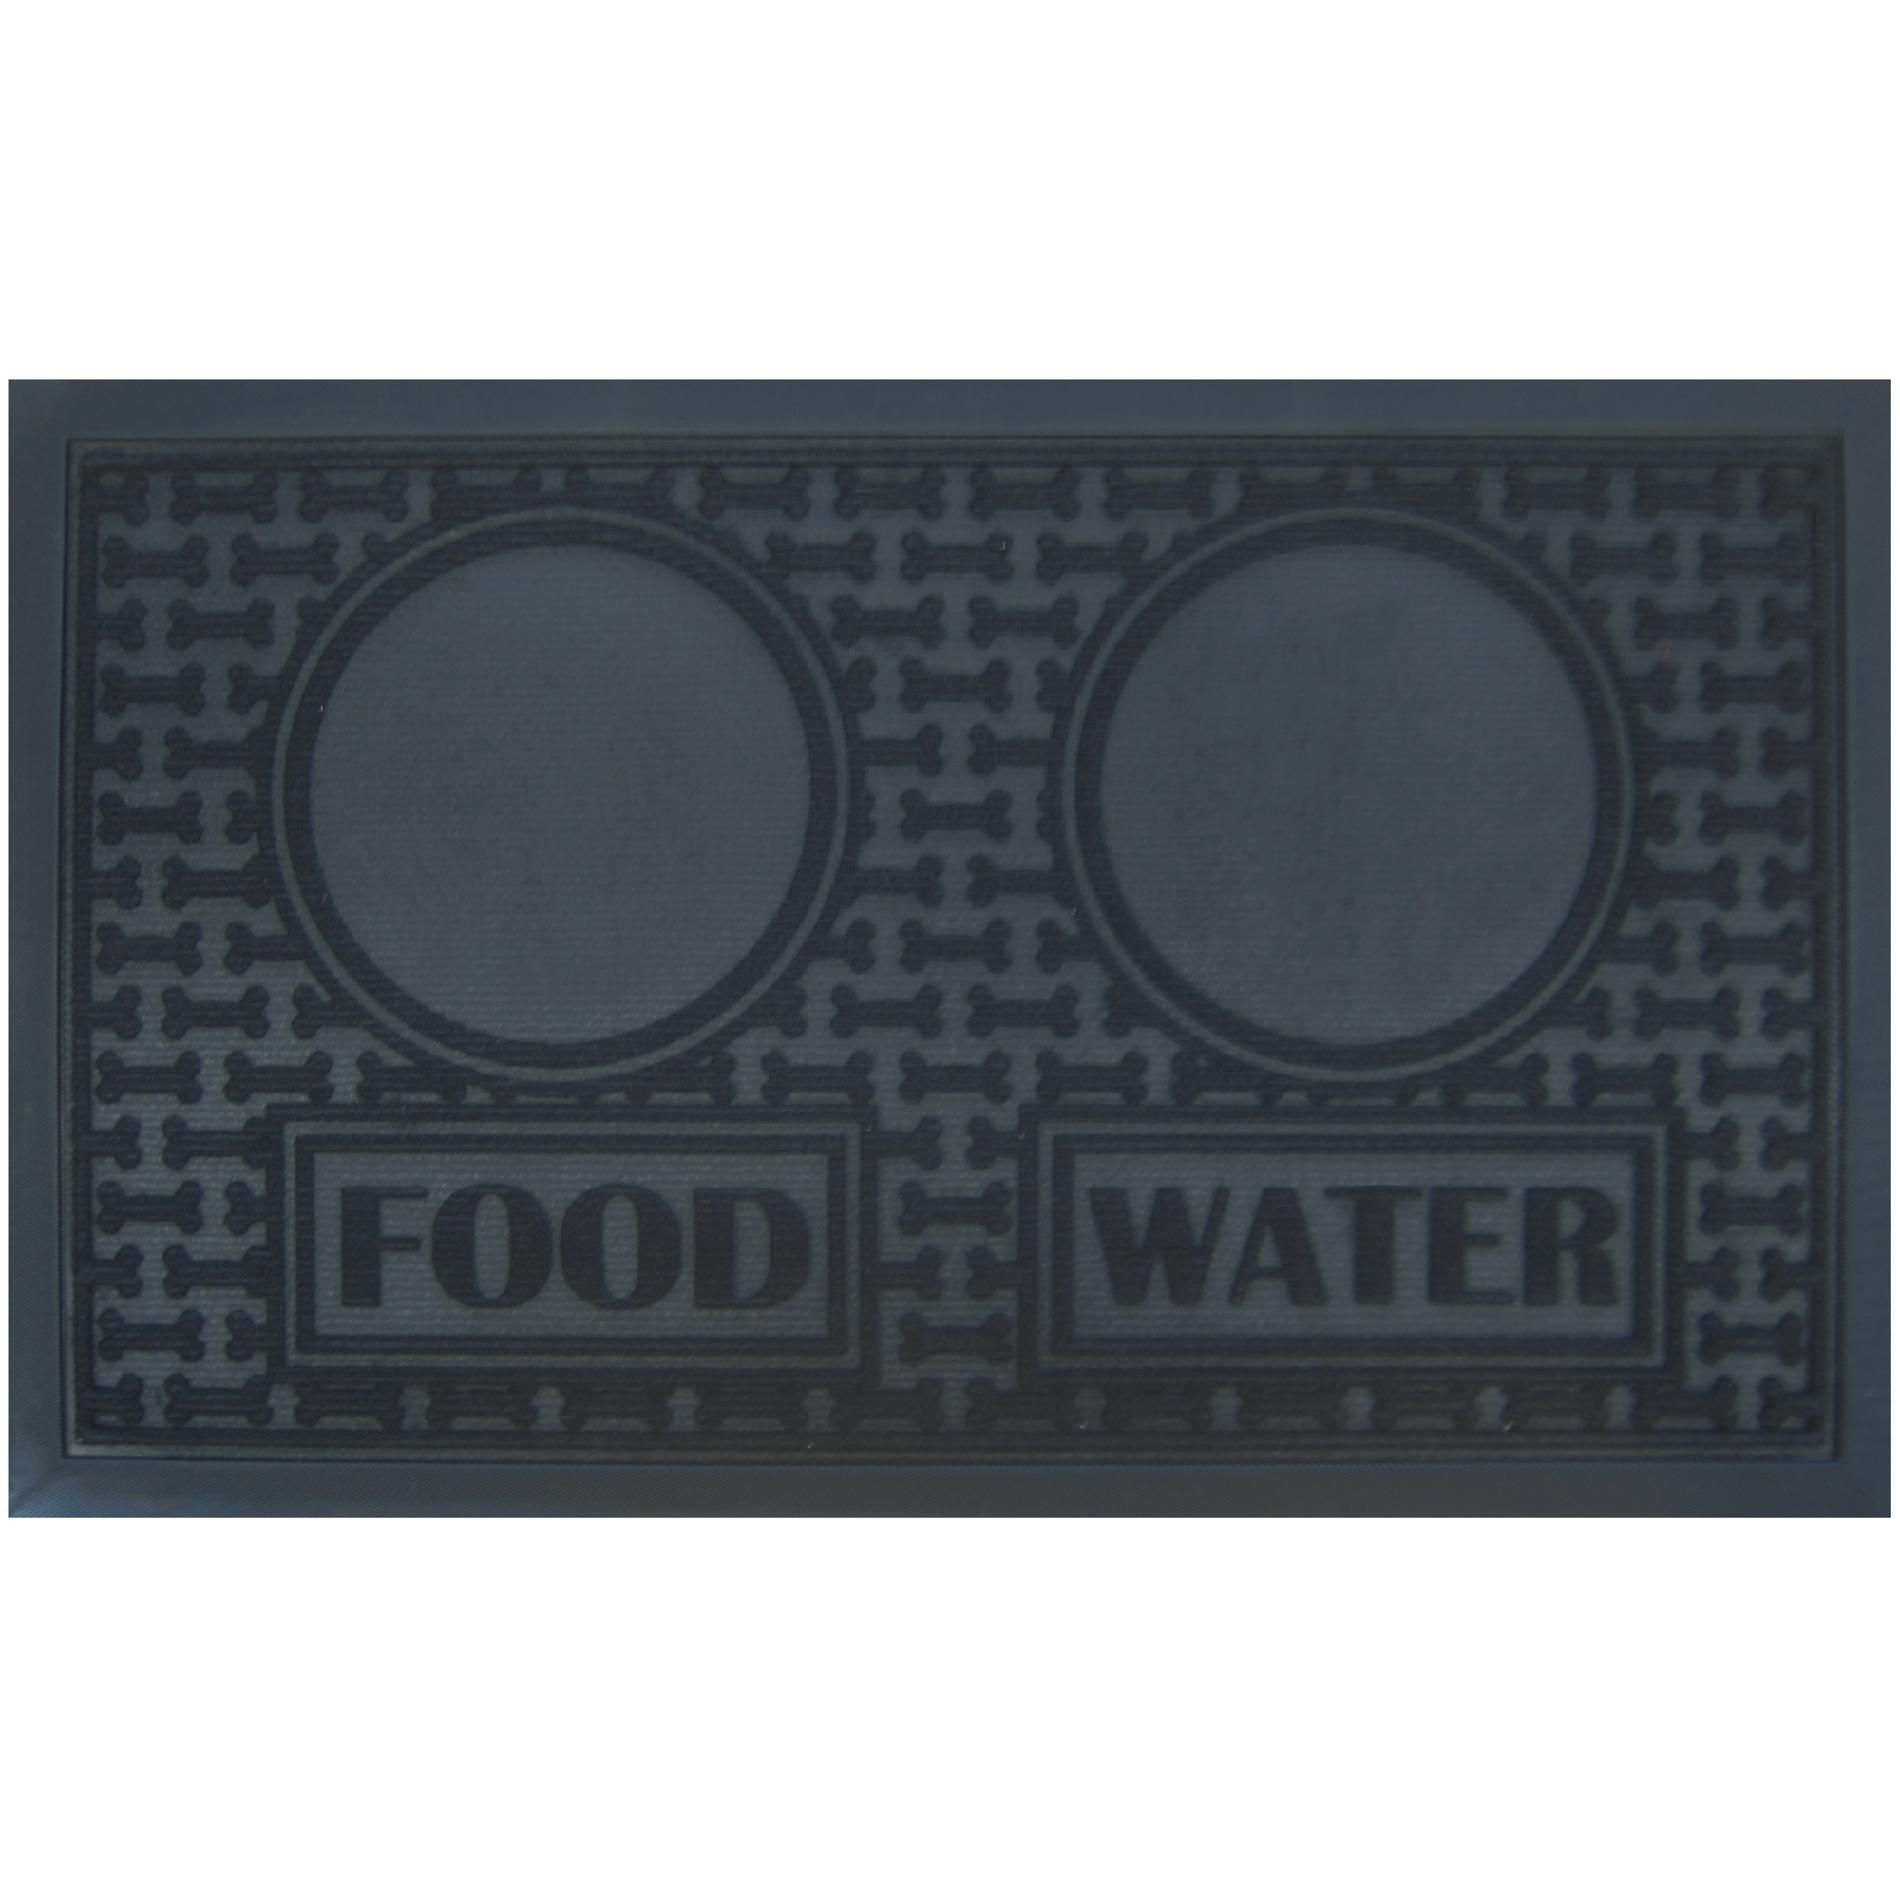 Food and Water Mat 18X30